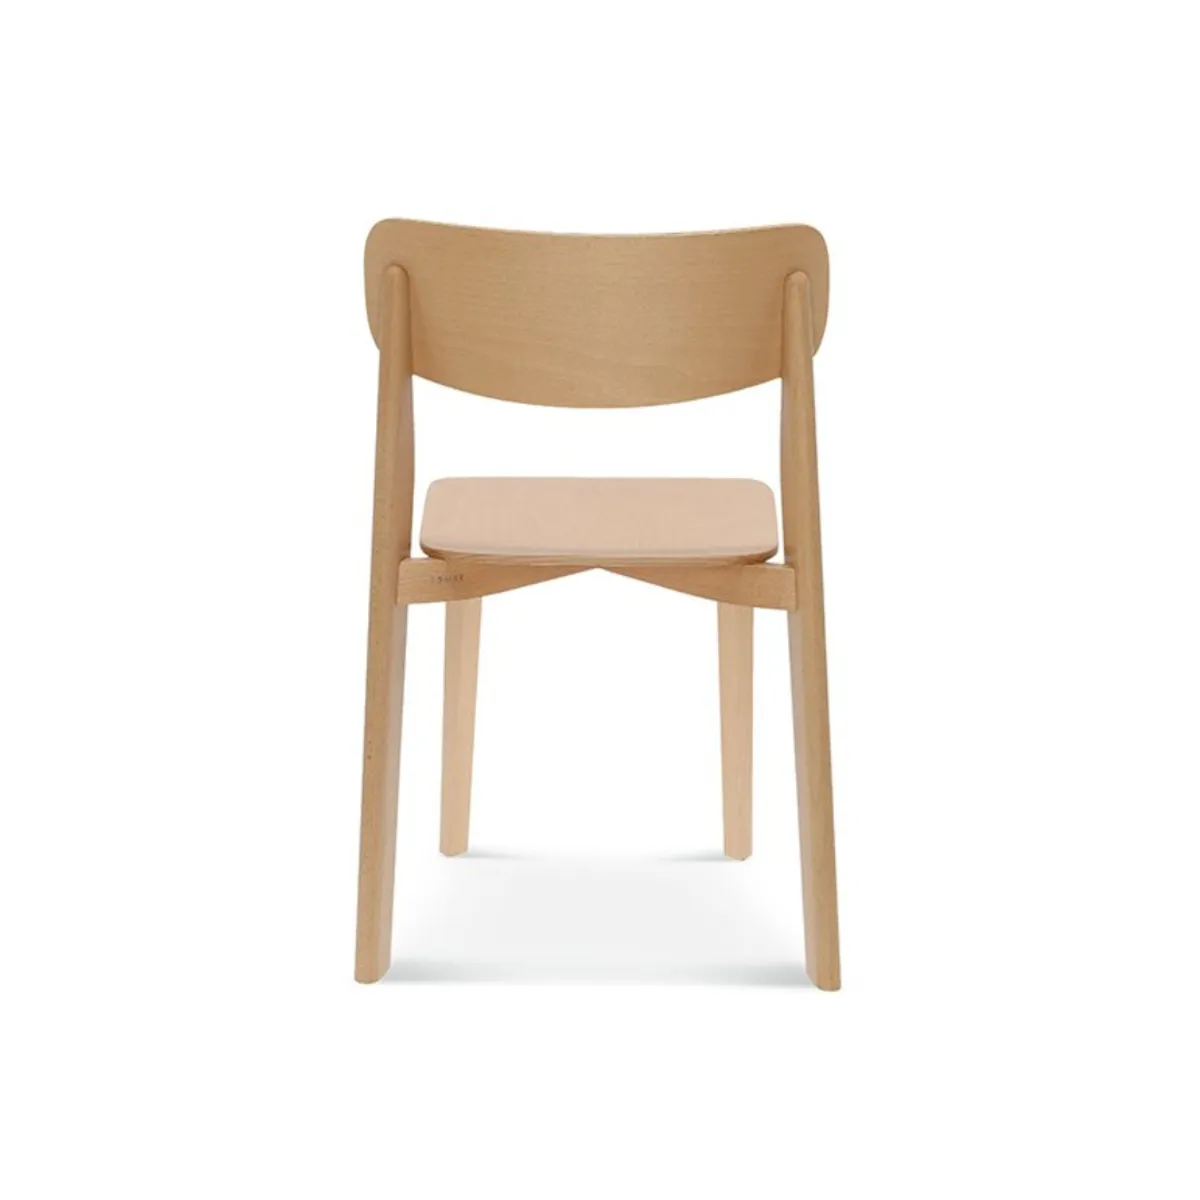 Parlour stacking side chair 4